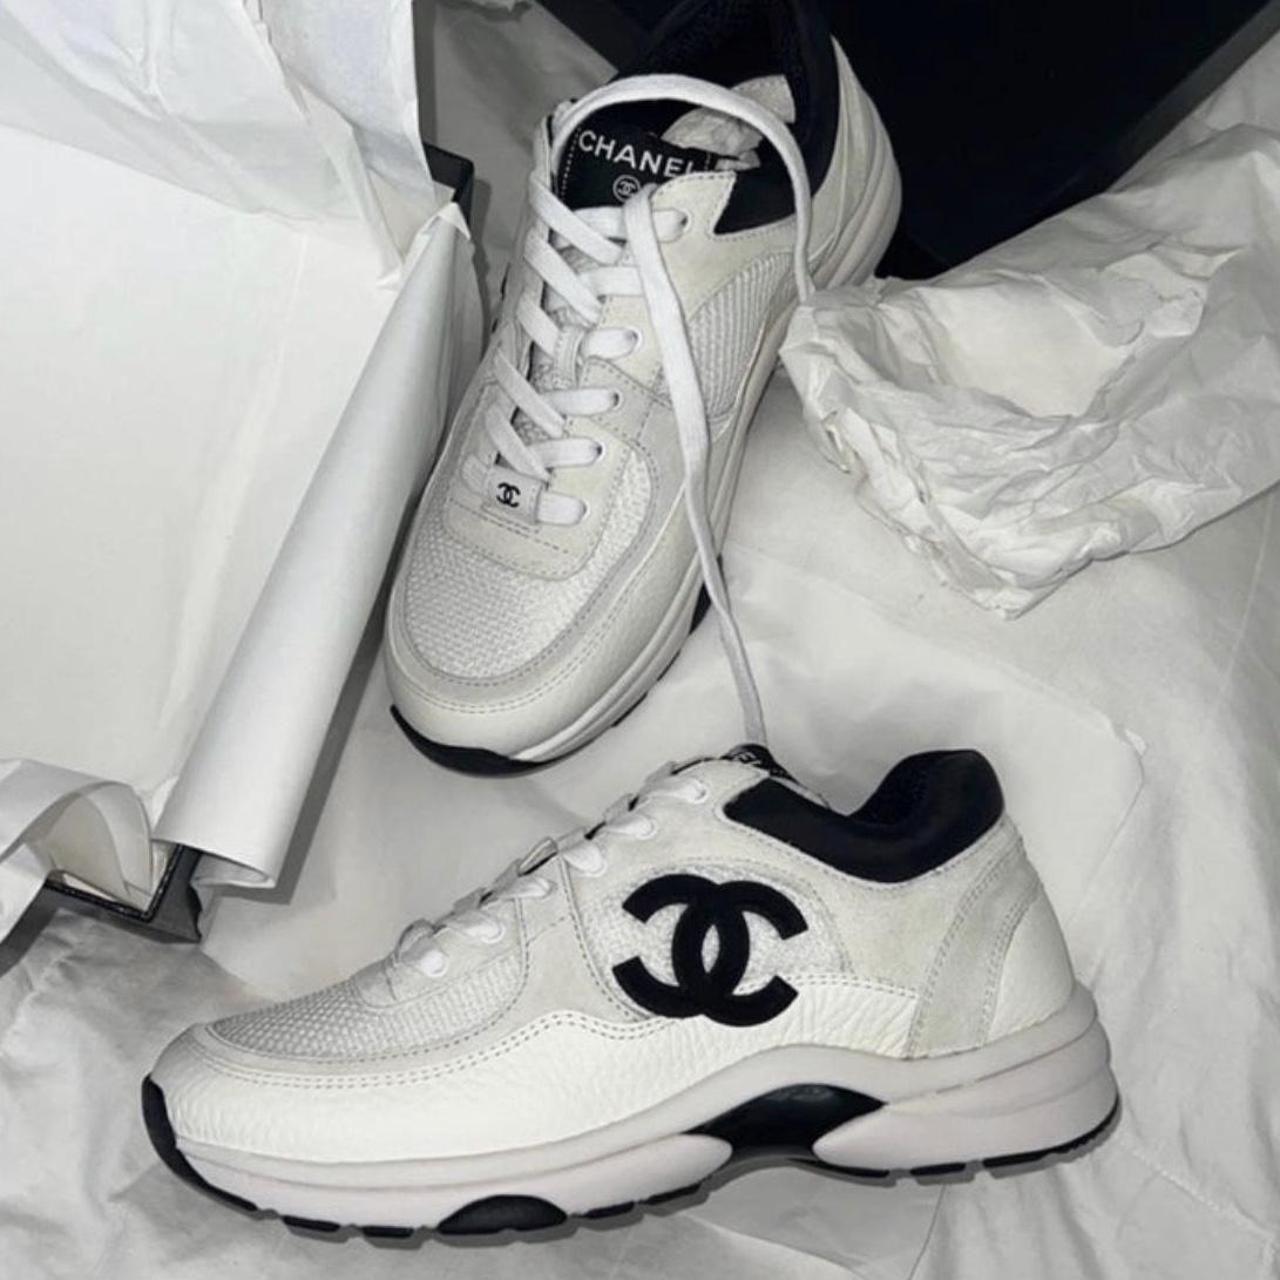 Miss Melisa Shoe and bag Chanel Womens Sneakers and Bags Special Design of  the New Year 2022 Model S142  13000 Dolar  KDV